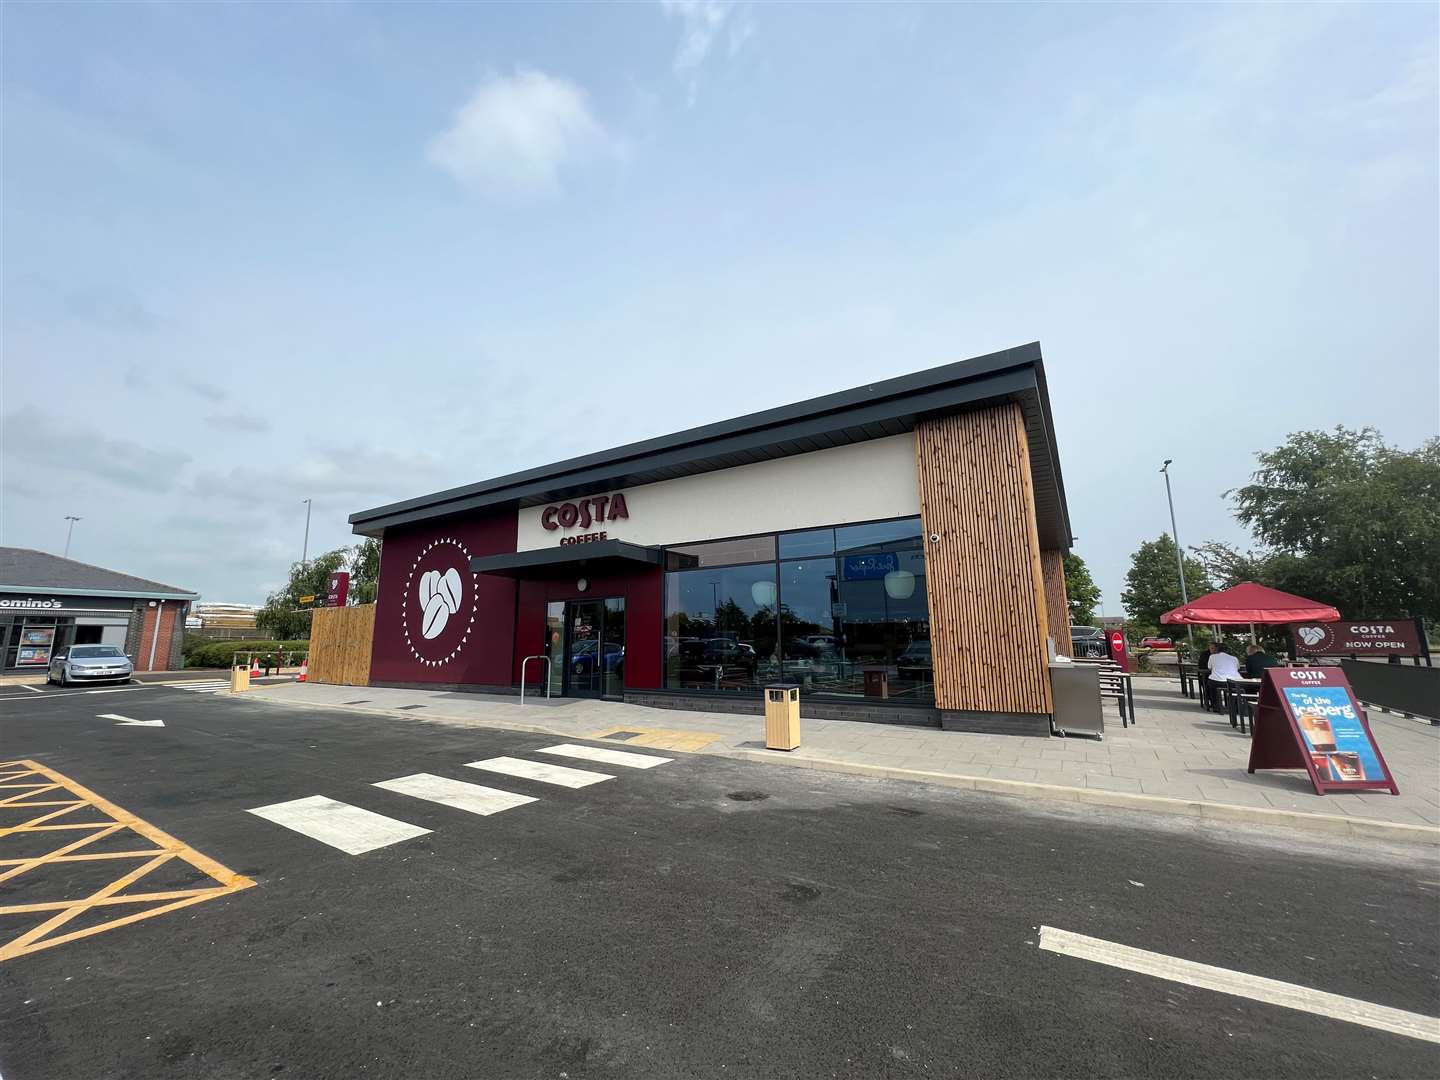 The exterior of the new Costa on St Nicholas Retail Park